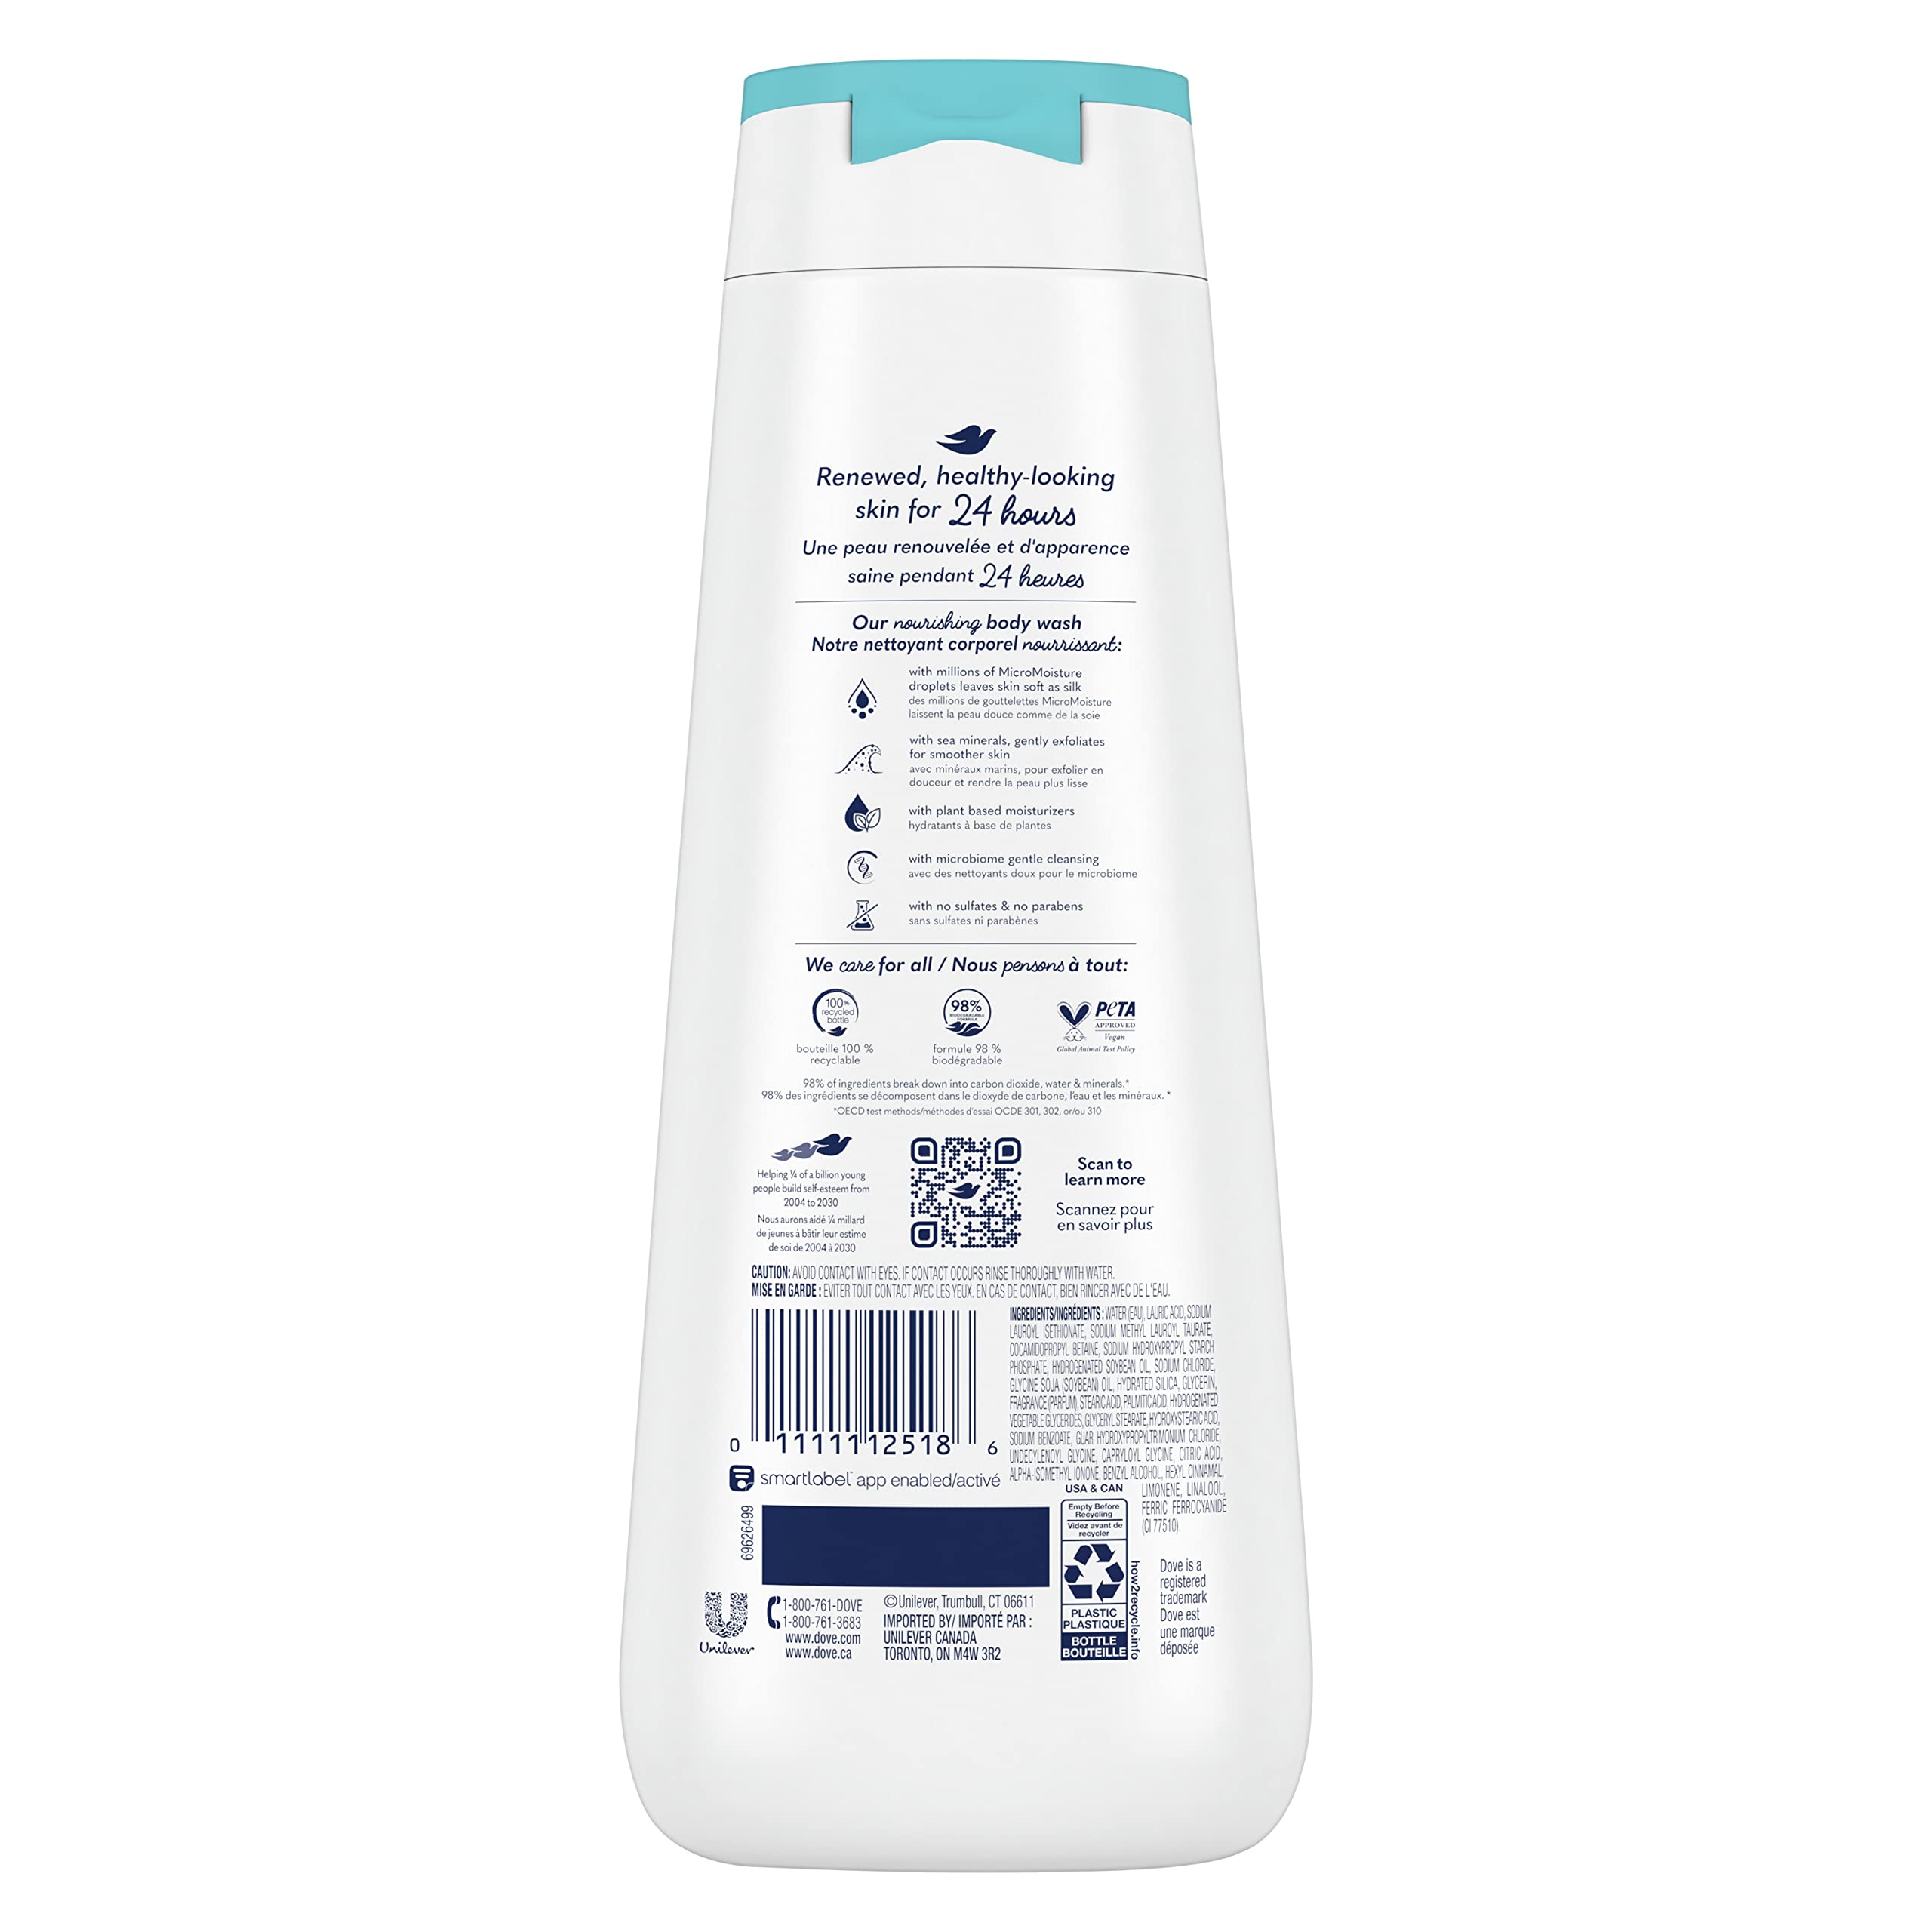 Dove Body Wash Gentle Exfoliating With Sea Minerals 4 Count Instantly Reveals Visibly Smoother Skin Cleanser That Effectively Washes Away Bacteria While Nourishing Your Skin 20 oz